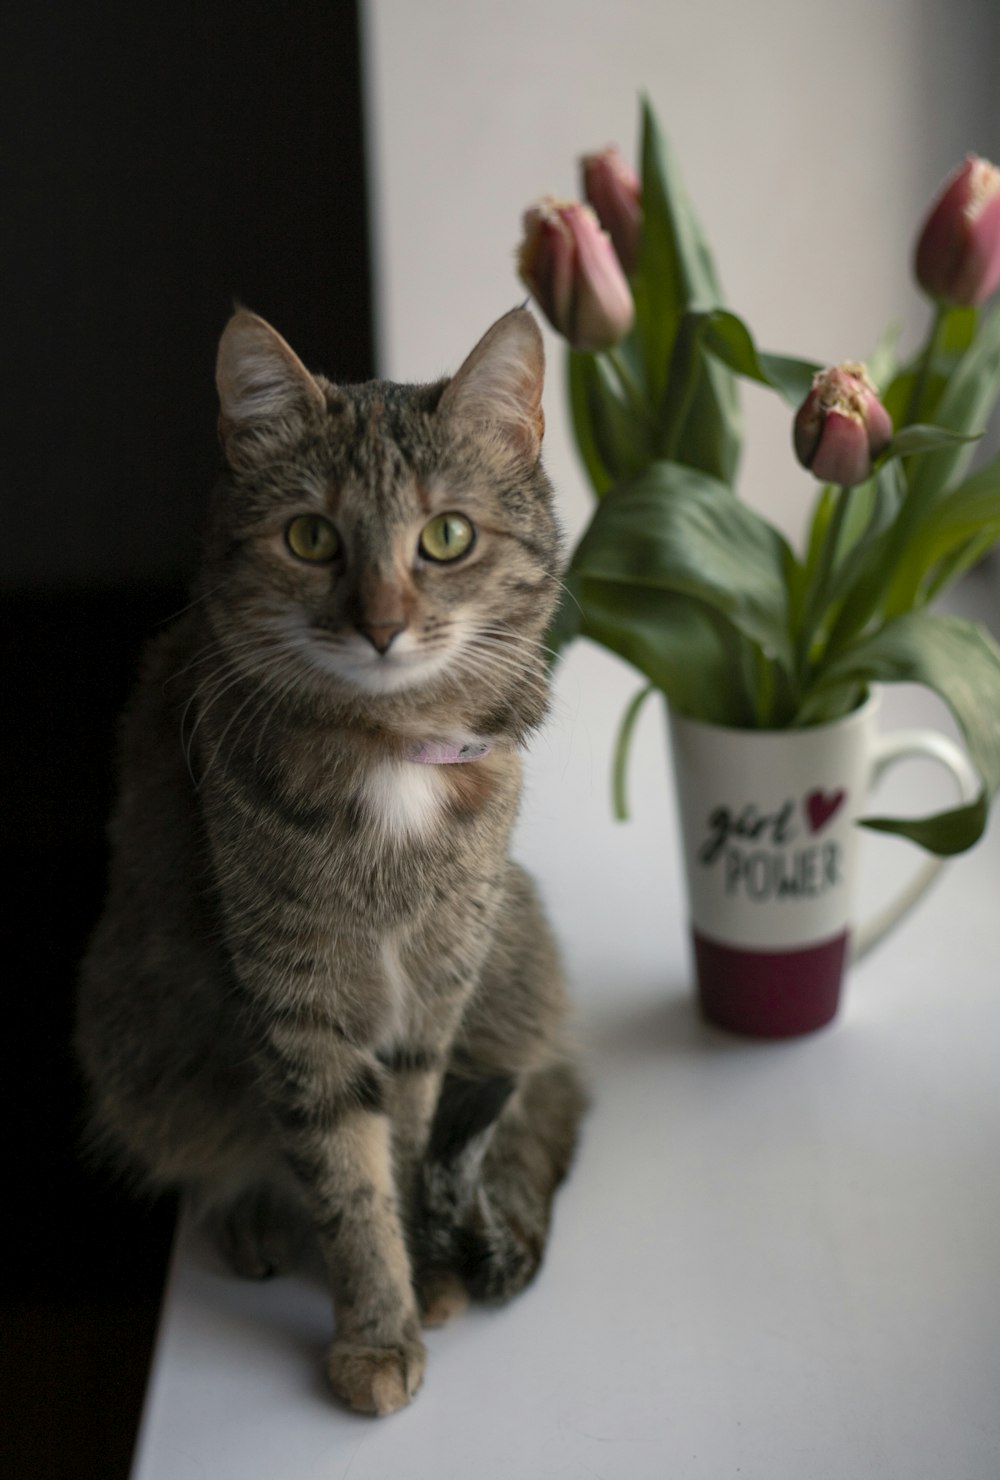 a cat sitting on a table next to a vase with flowers